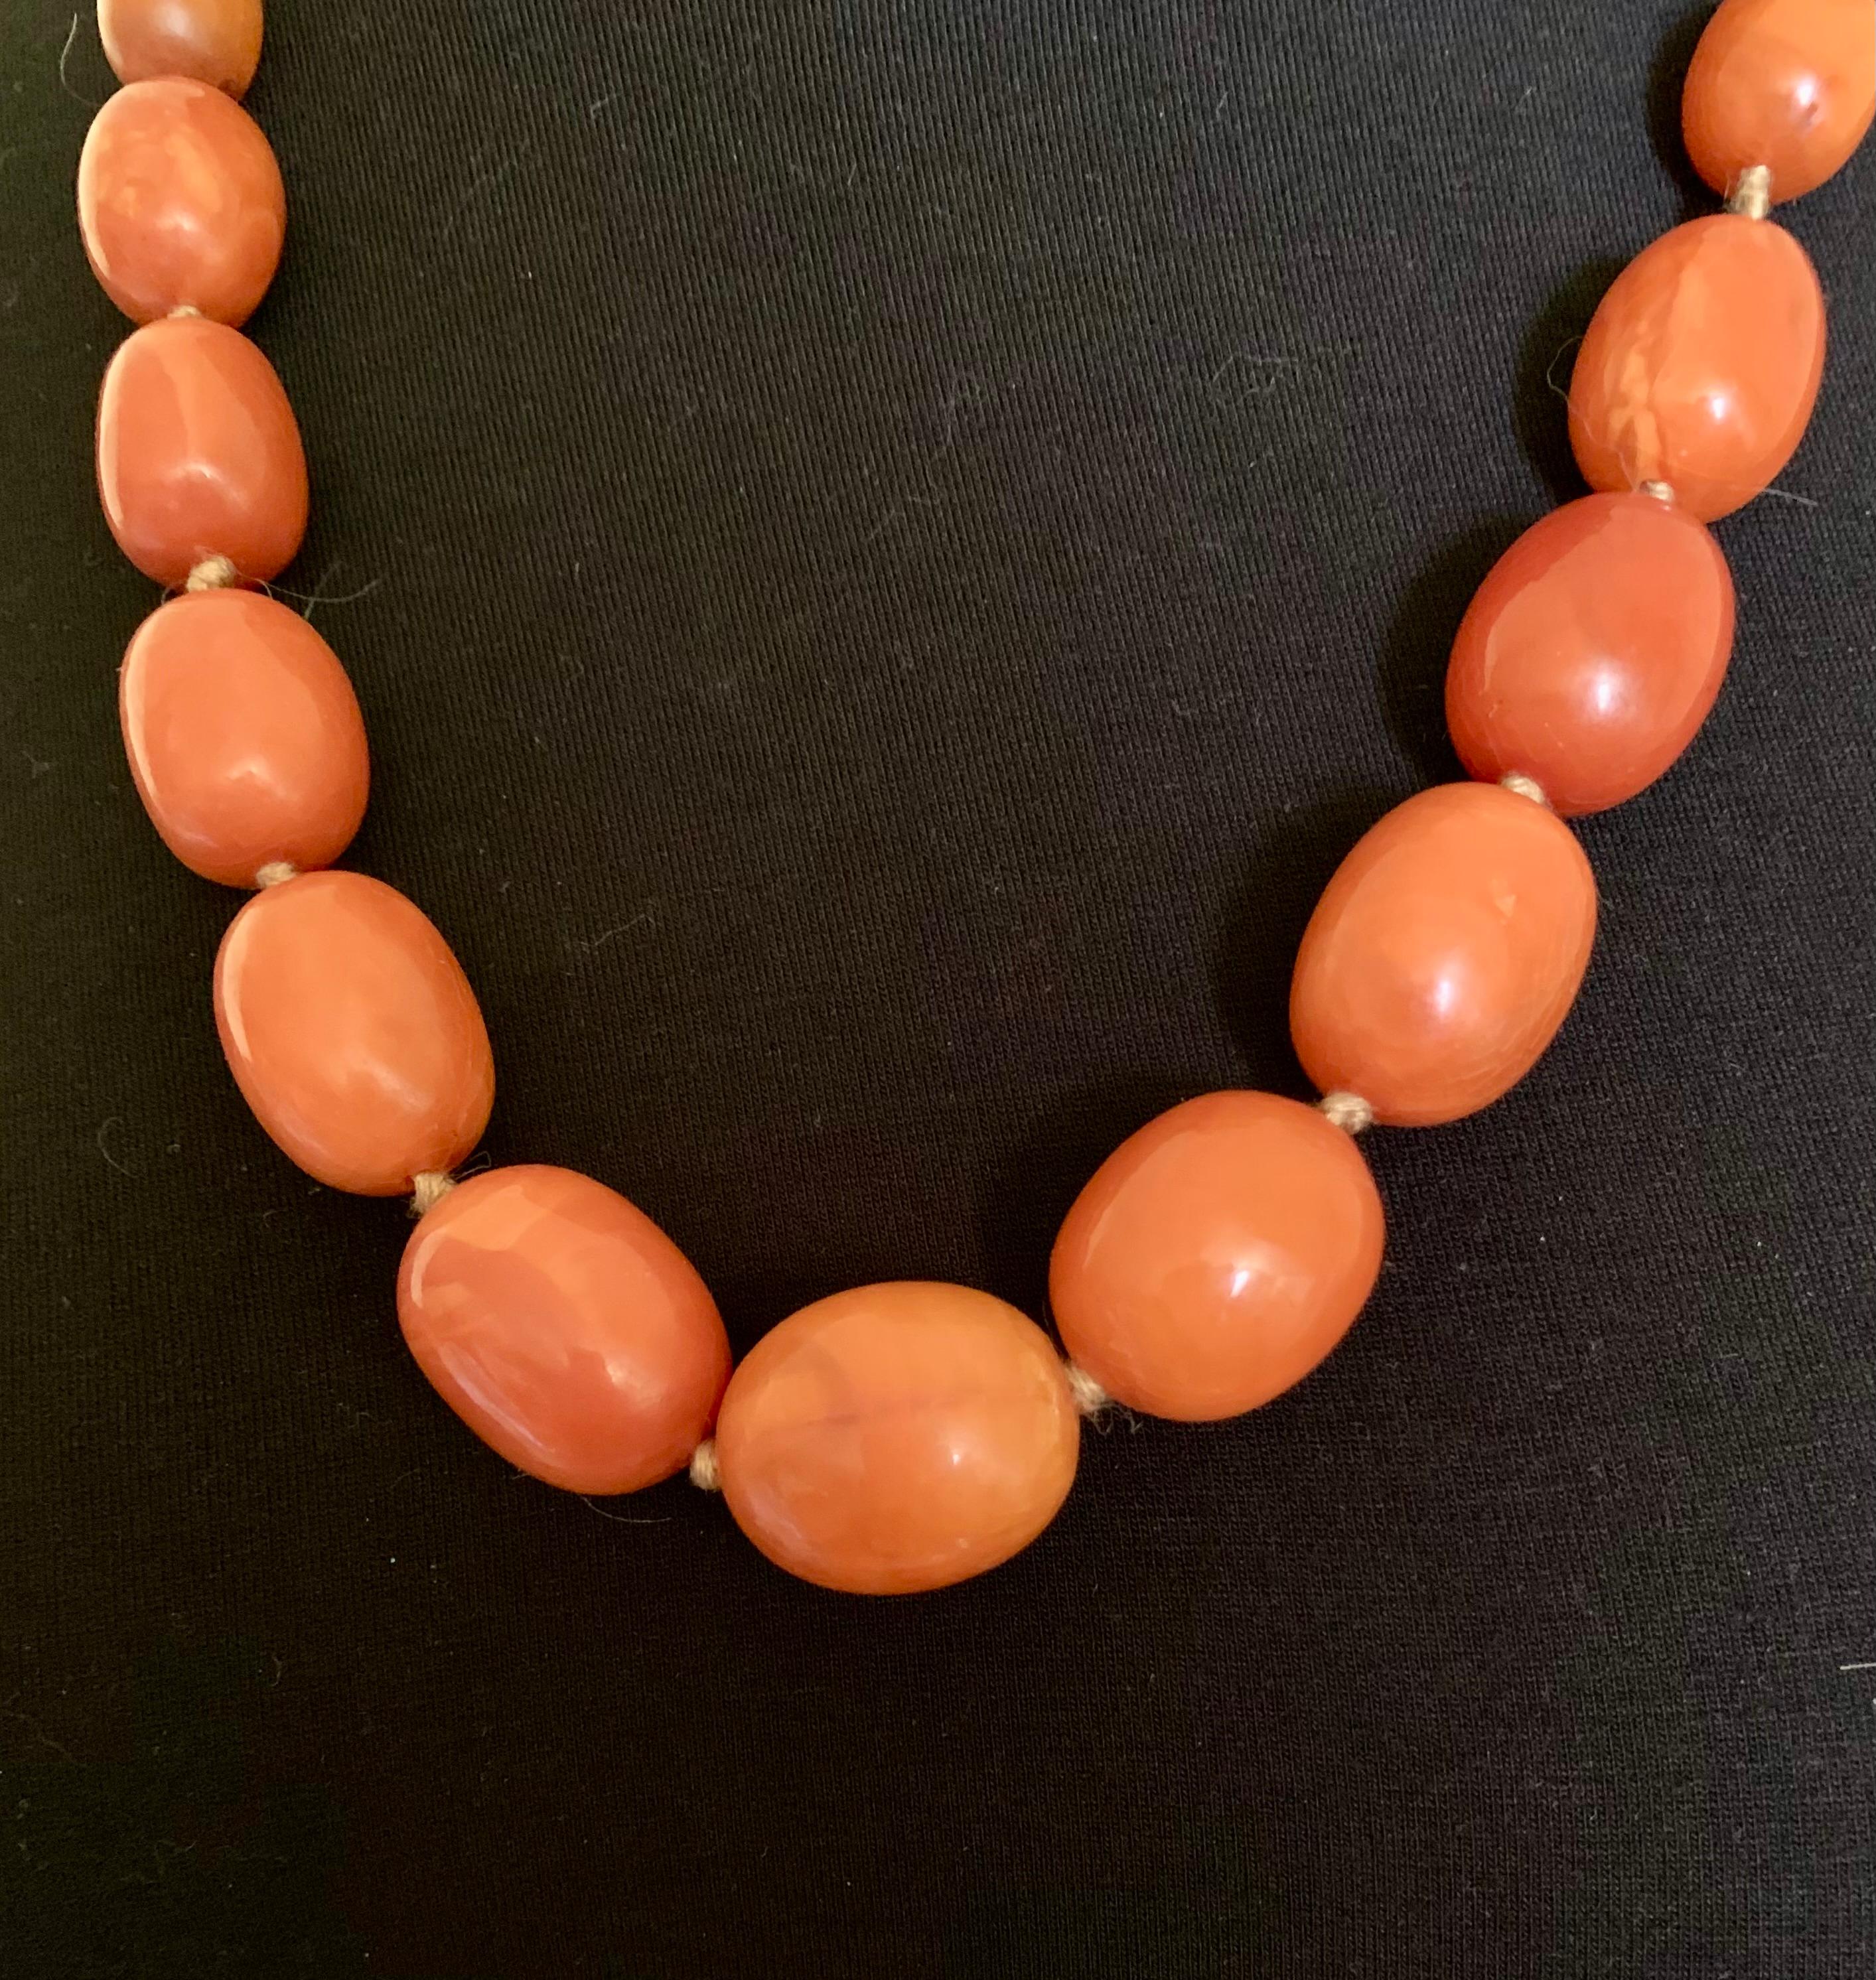 Beautiful, large, natural graduated oval bead antique amber necklace composed of thirty four hand knotted beads 25mm to 6mm, of desirable yellow-orange color with attractive natural variegation.
19th Century
Length: 26 inches
Amber is fossilized